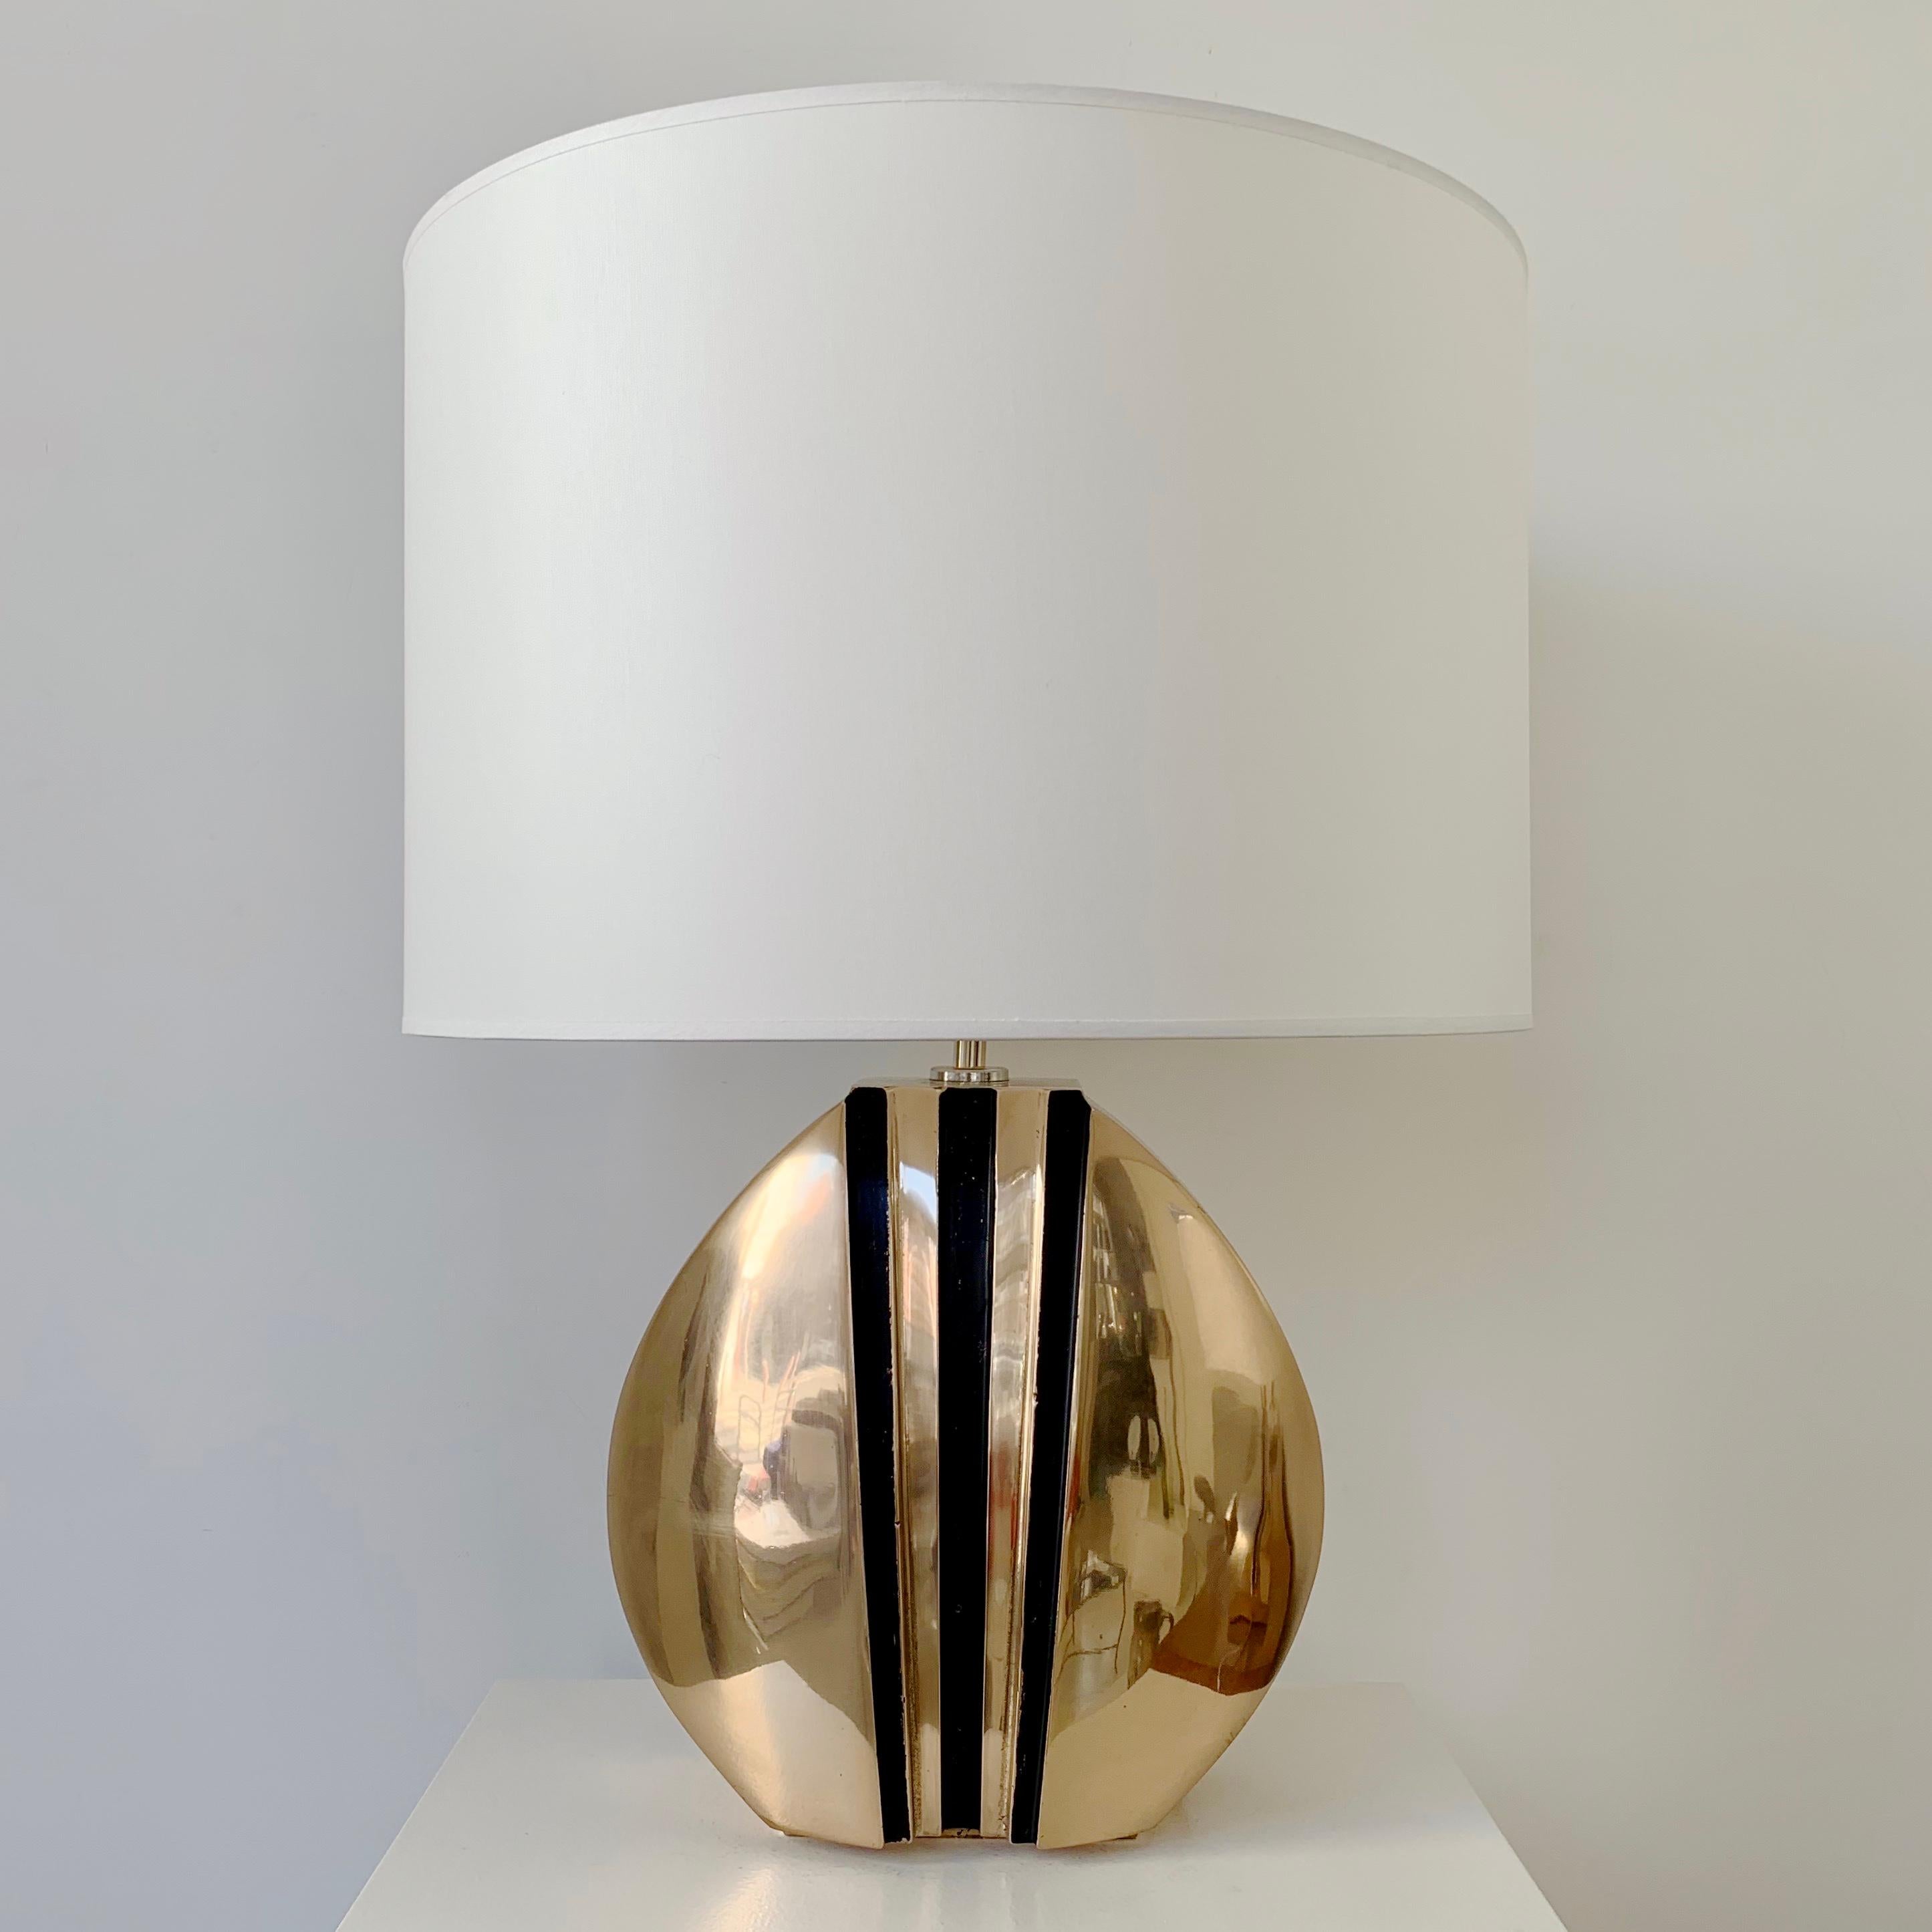 Esa Fedrigolli table lamp, circa 1970, Italy.
Gold bronze and black patina. New fabric shade.
Signed Esa Fedrigolli.
Dimensions: 58 cm H, 43 cm W, 43 cm D.
All purchases are covered by our buyer protection guarantee.
This item can be returned